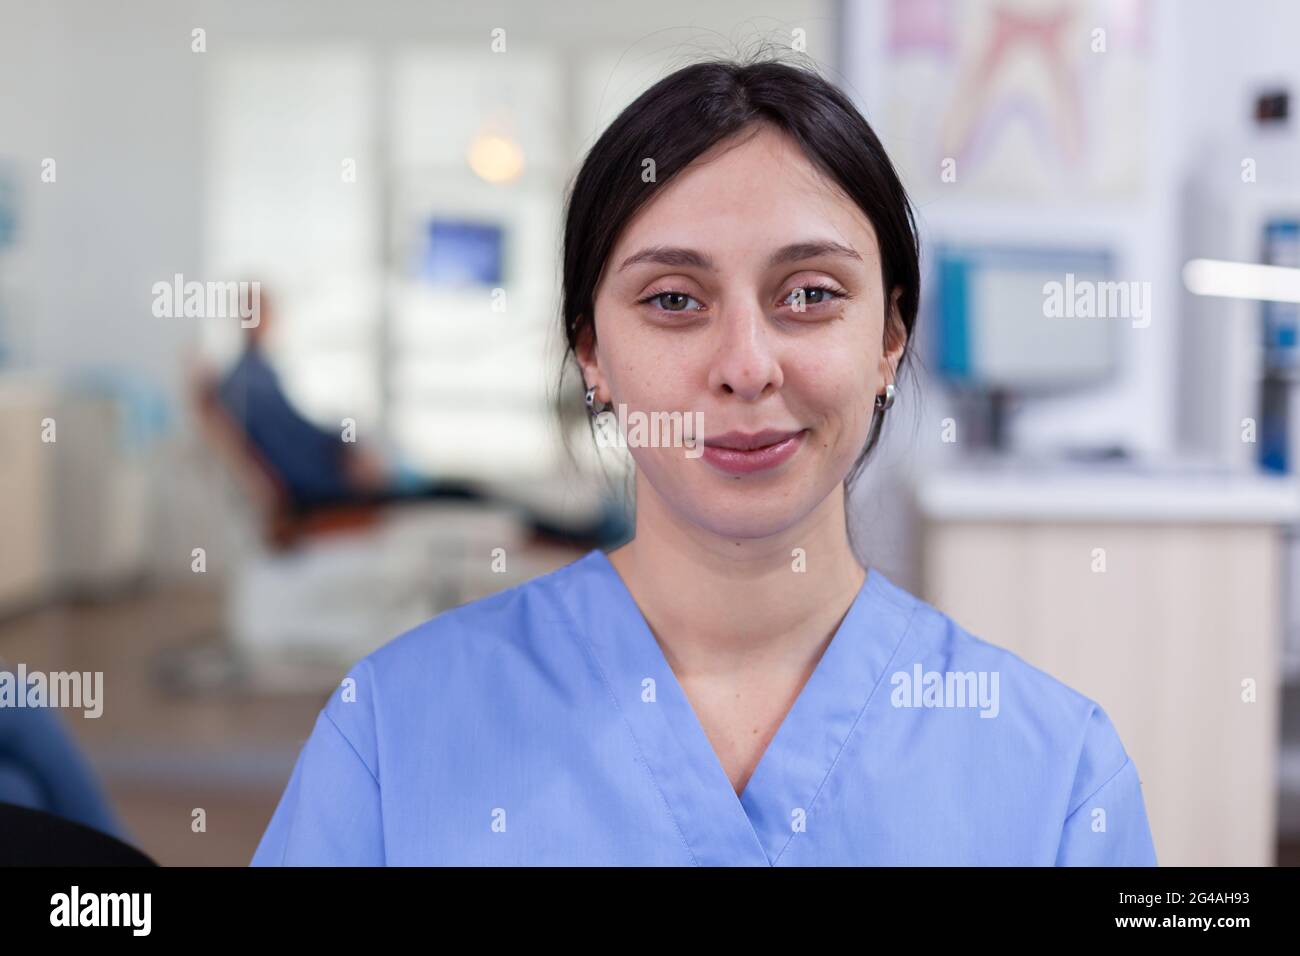 Smiling stomatology nurse looking at camera in dentist office wainting area, senior man waiting for teeth health examination. Dentistiry woman sitting on chair. Stock Photo